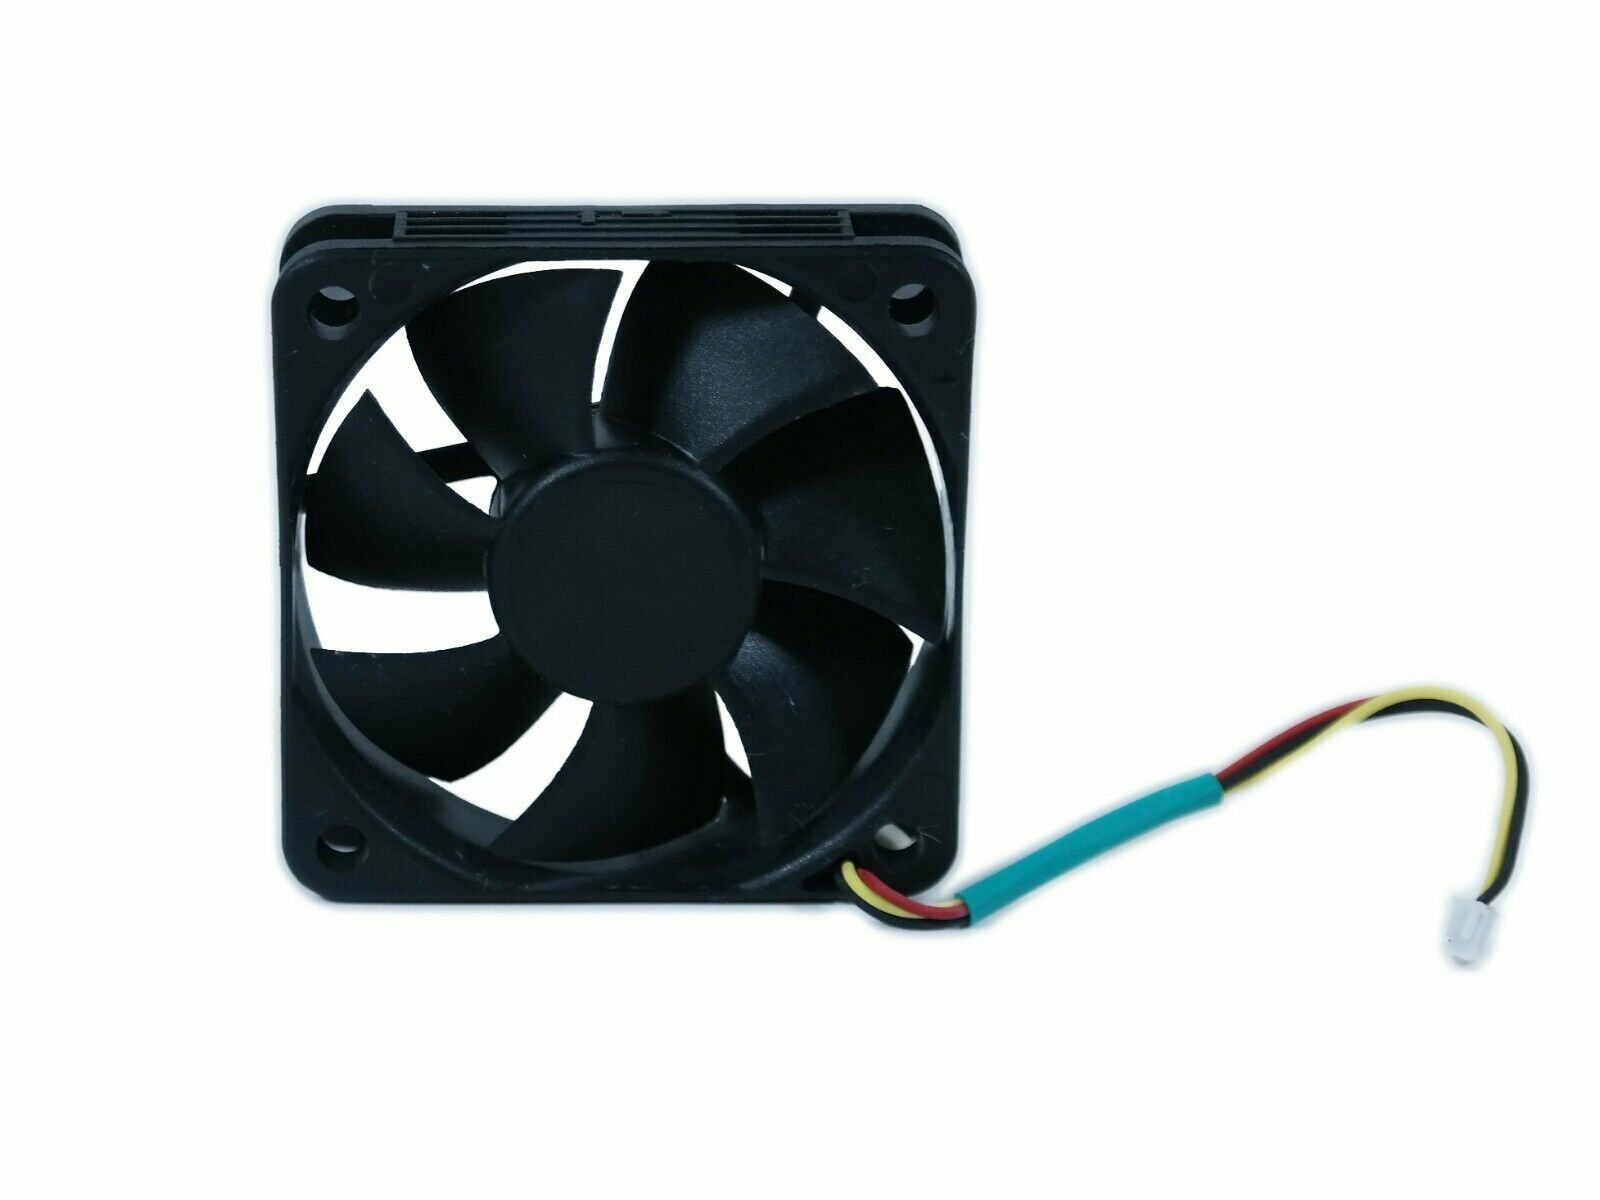 OEM Sunon GM1255PHV1-A 3-Pin Projector Fan 12V 1.7W for Dell 4610X 4220 4210X